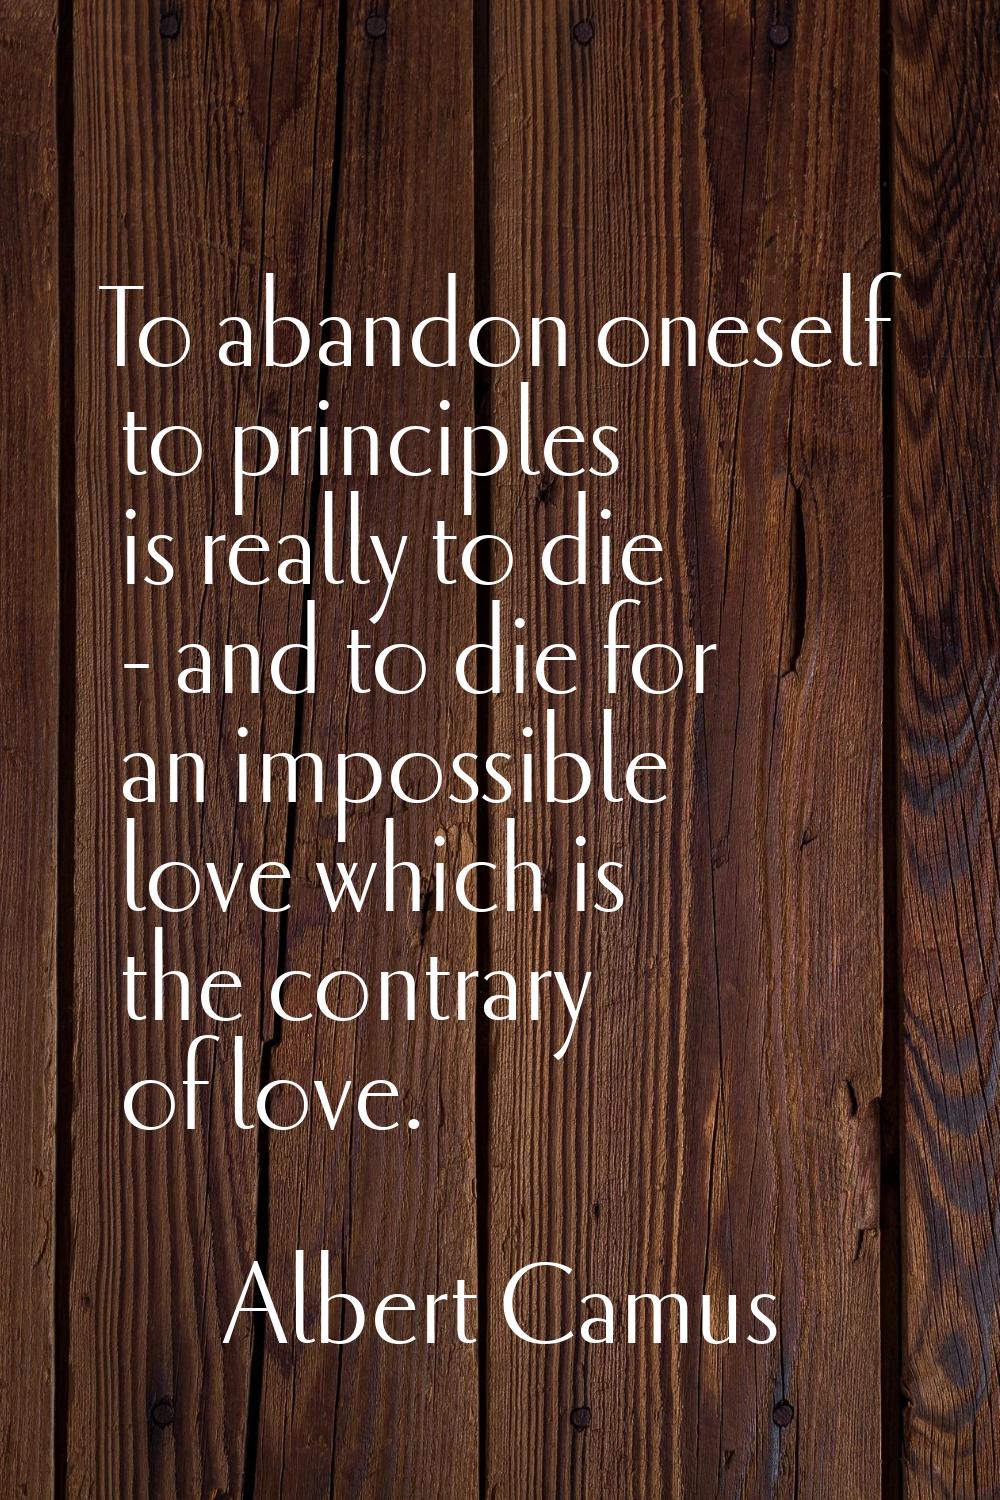 To abandon oneself to principles is really to die - and to die for an impossible love which is the 